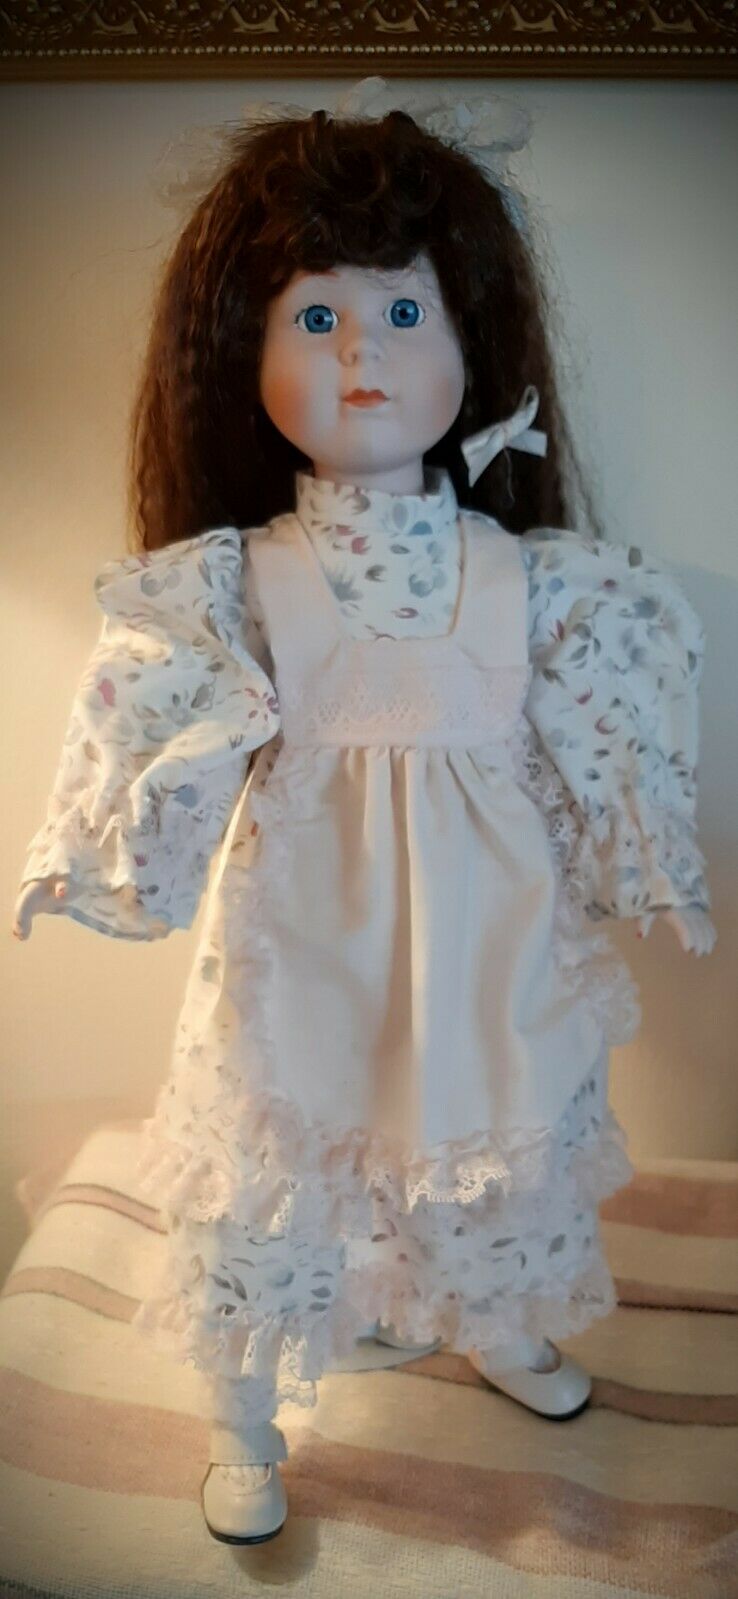 The Heritage Mint Ltd Collection Porcelain 1989 Doll With Stand. Emily.